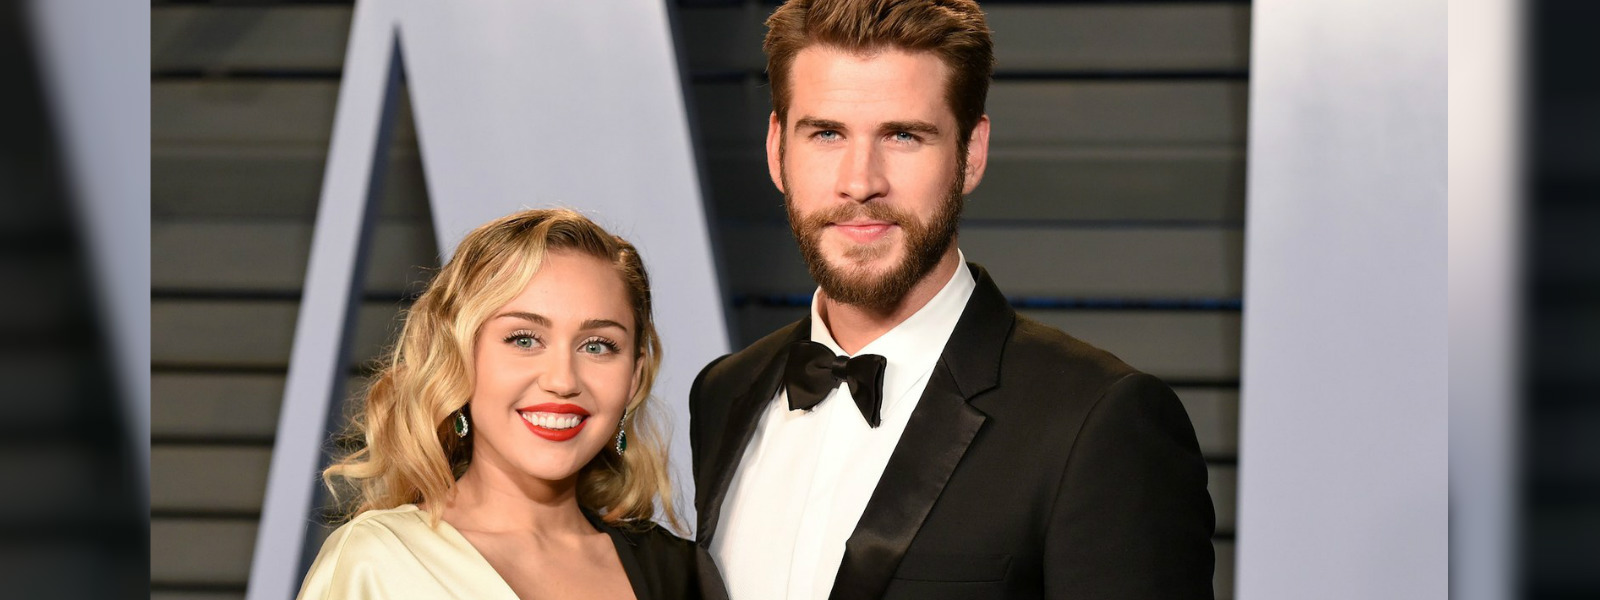 Miley Cyrus and Liam Hemsworth tie the knot